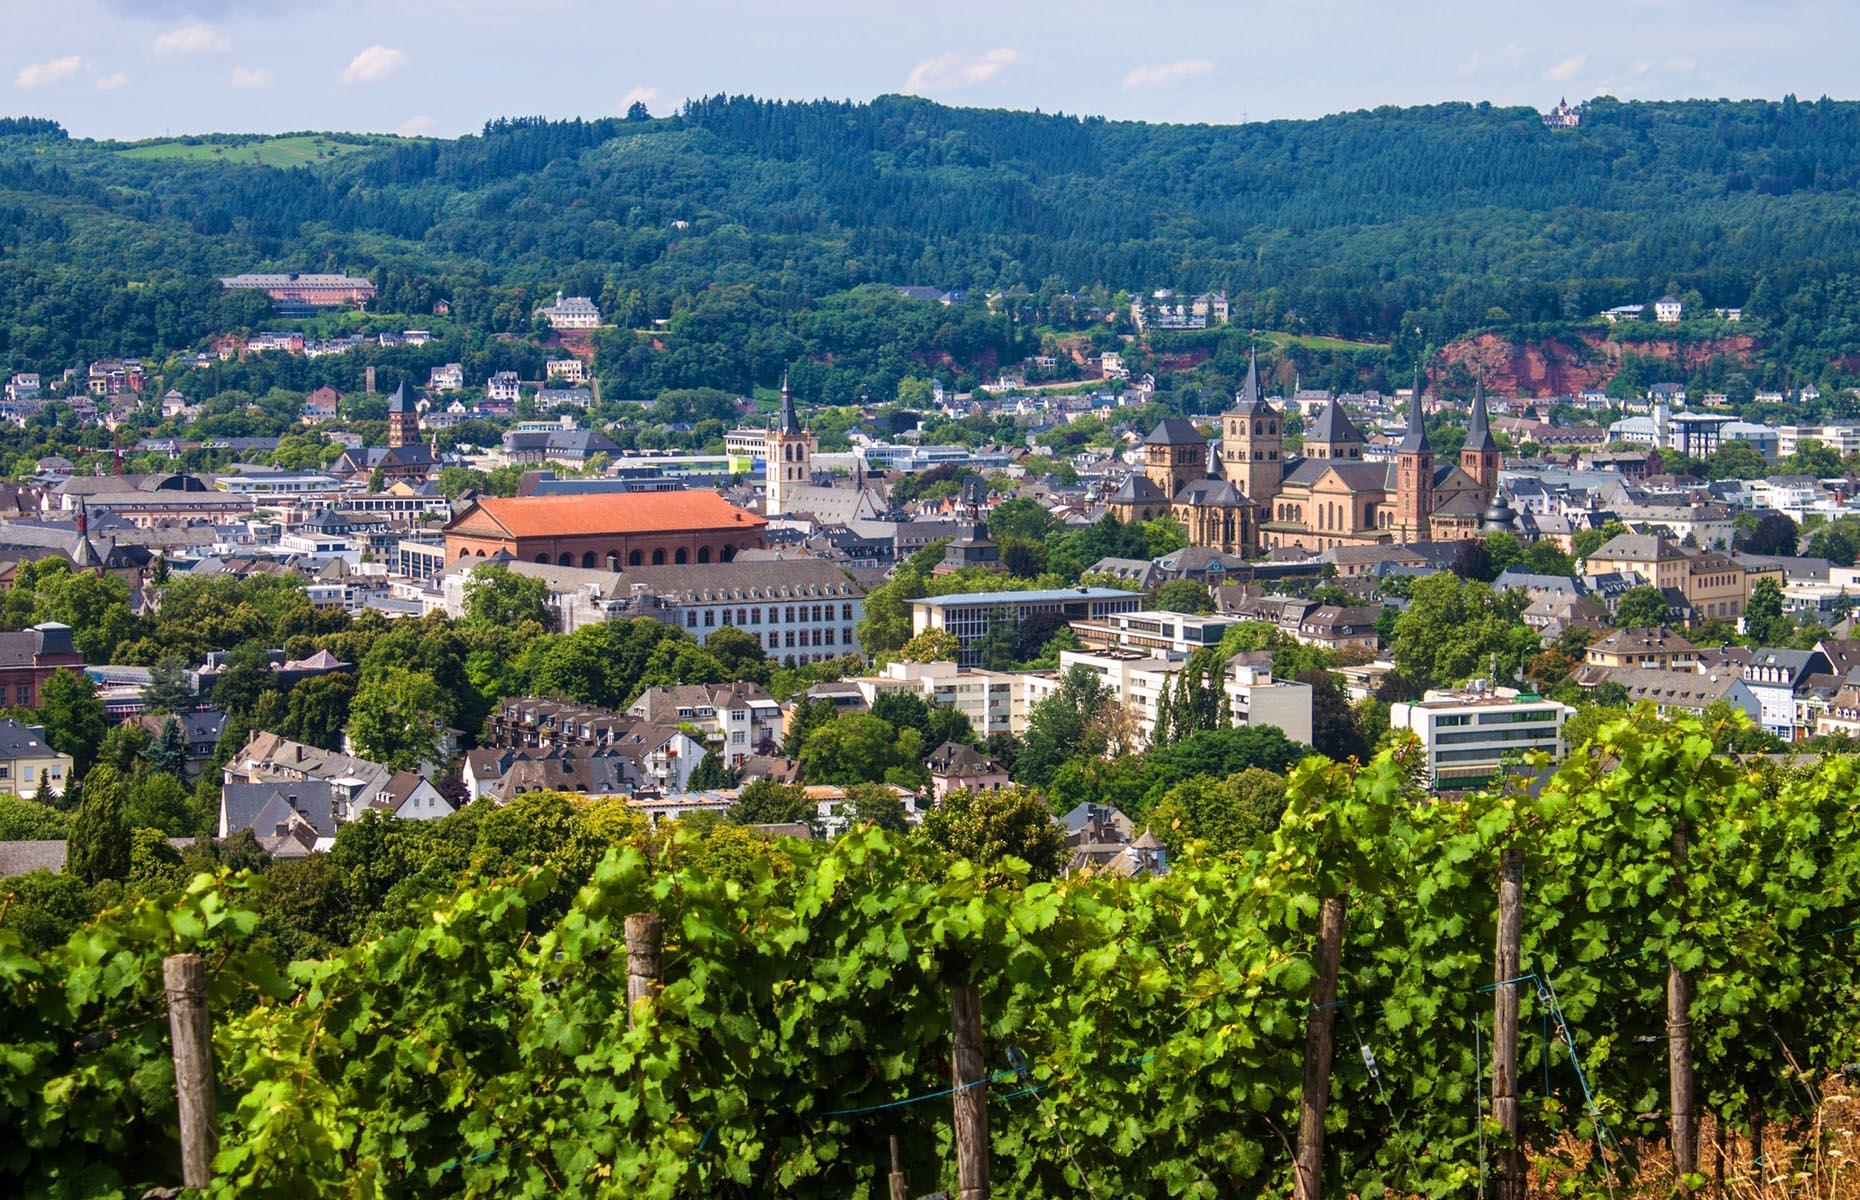 <p>Trier's Roman past and medieval center make for excellent exploring, but make sure to soak up the city’s extraordinary natural setting as well. Three major hiking trails pass through or nearby – the Saar-Hunsruck-Steig, the Eifelsteig and the Moselsteig – spanning forest glens, babbling streams and panoramic valley views. If culture is your thing, the Old Town Festival in June is a raucous celebration of live music and food.</p>